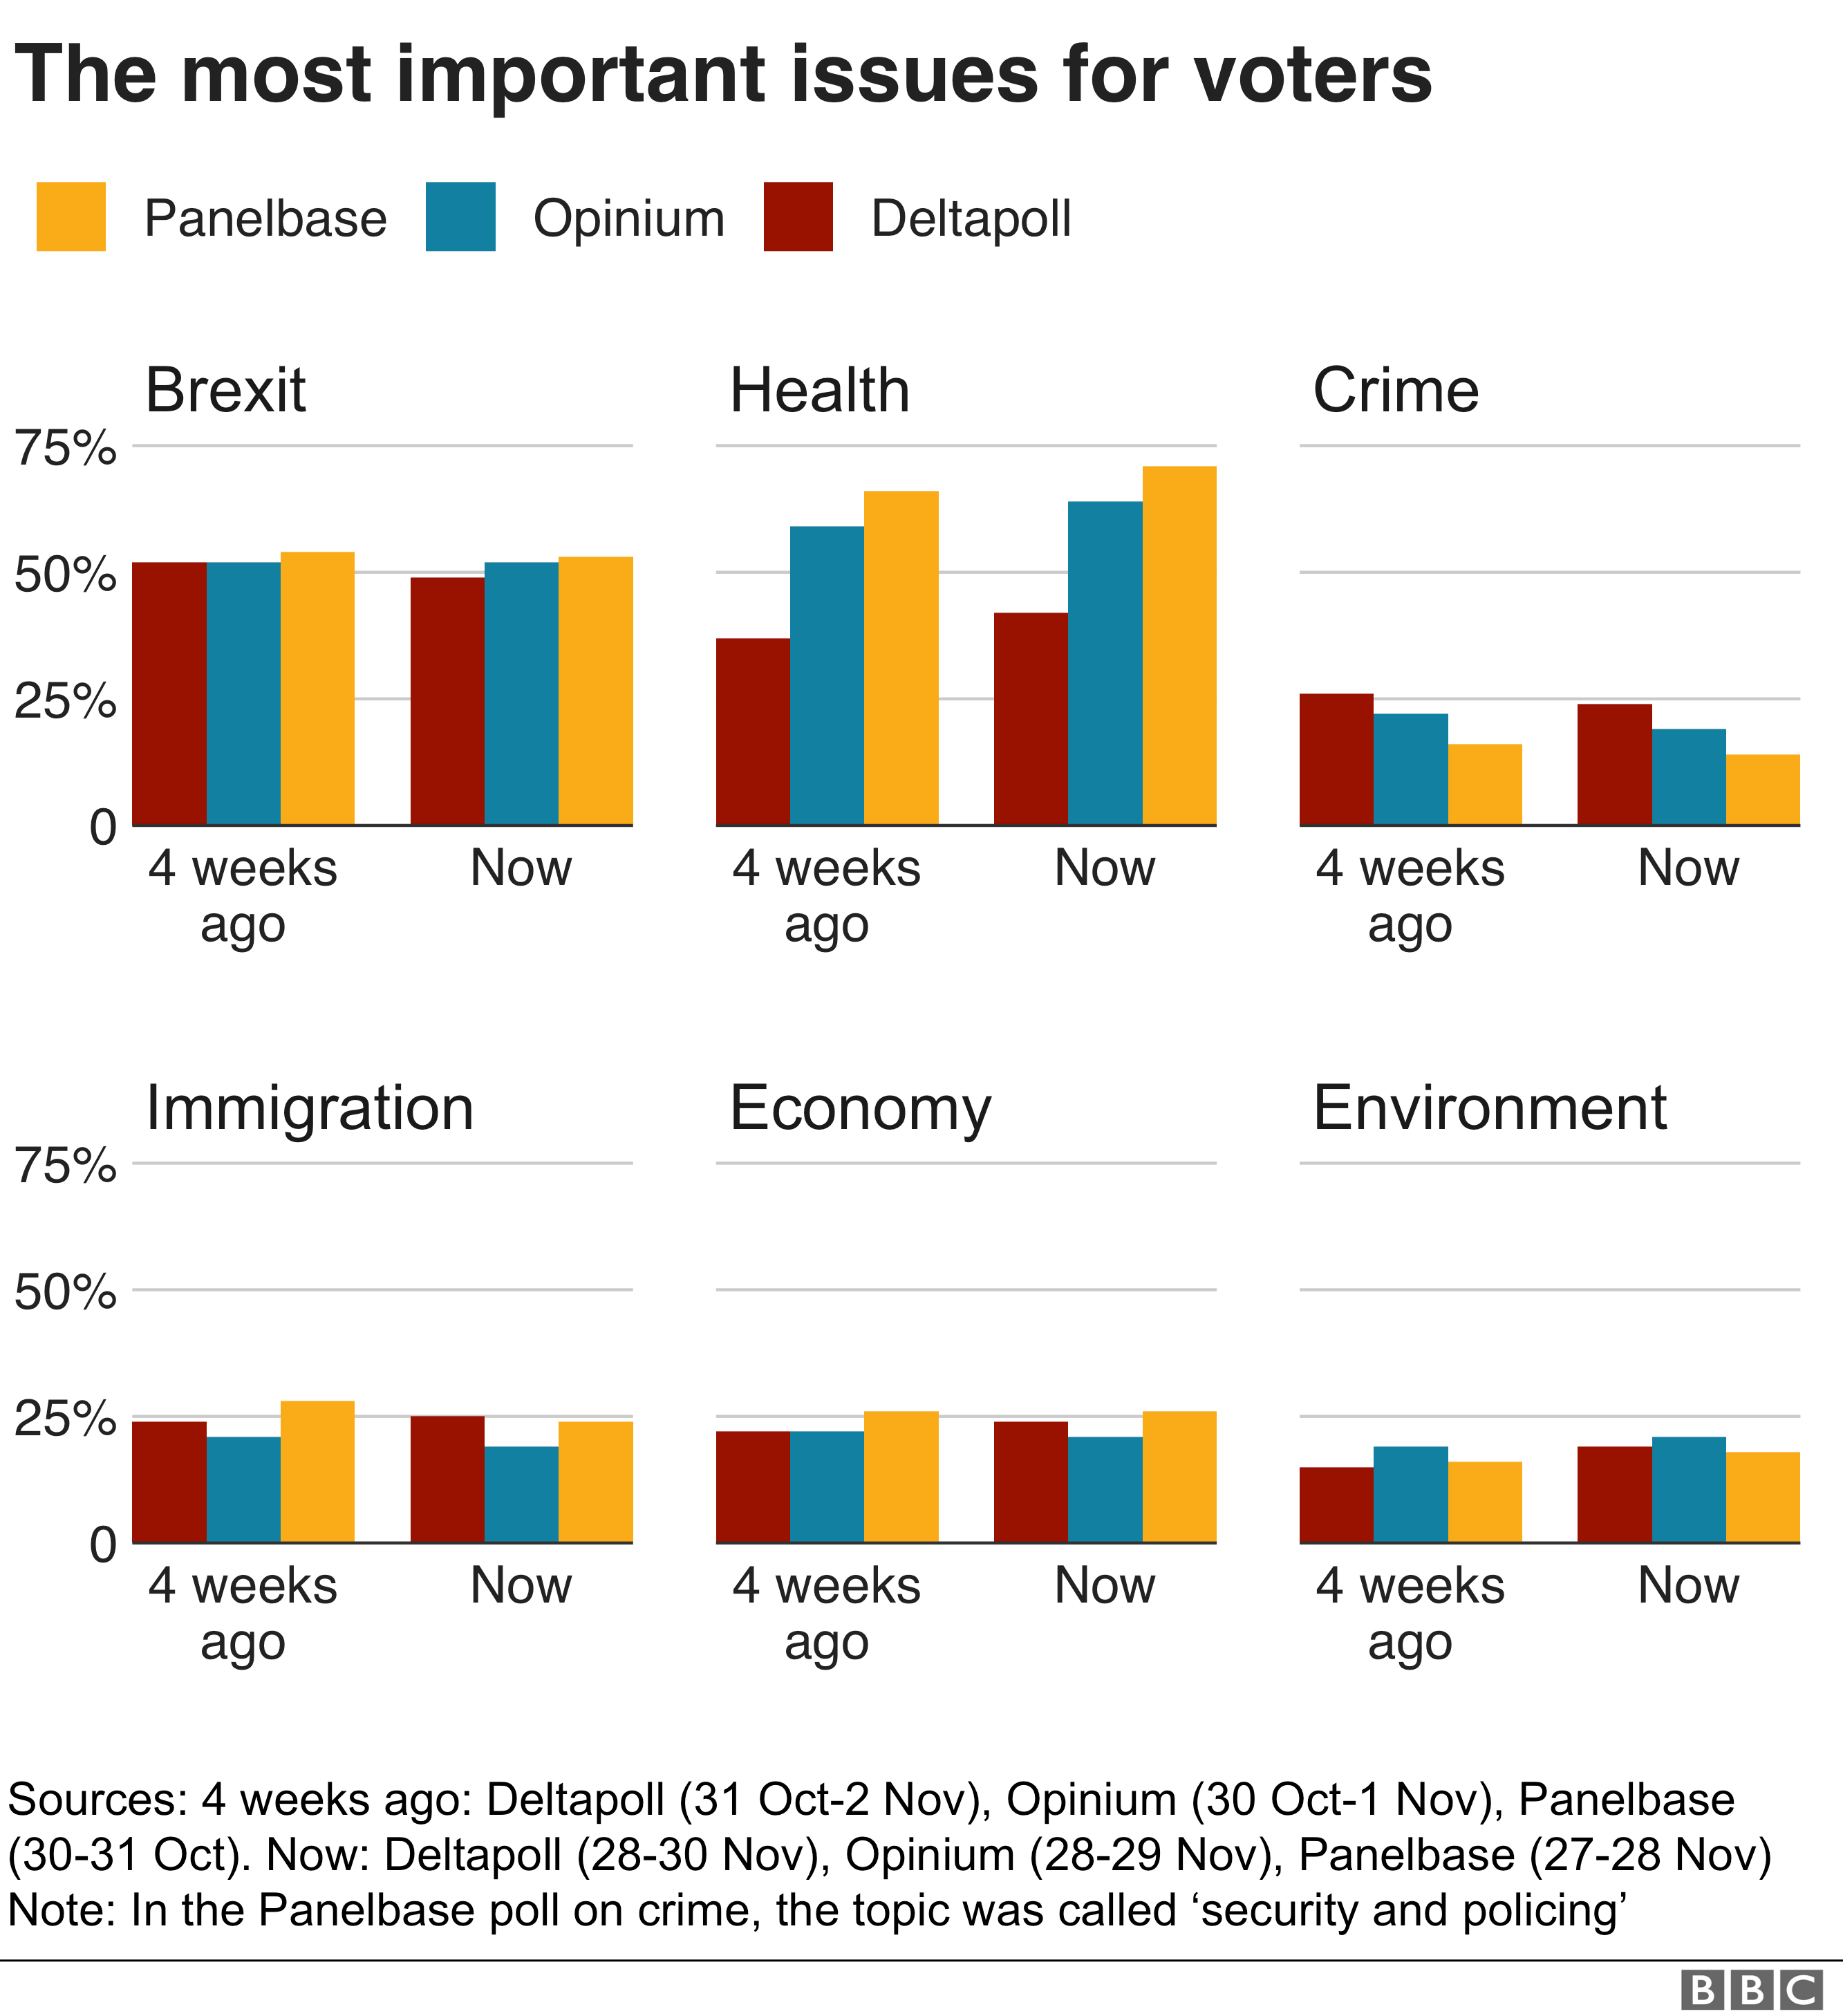 Bar charts of the most important issues for voters